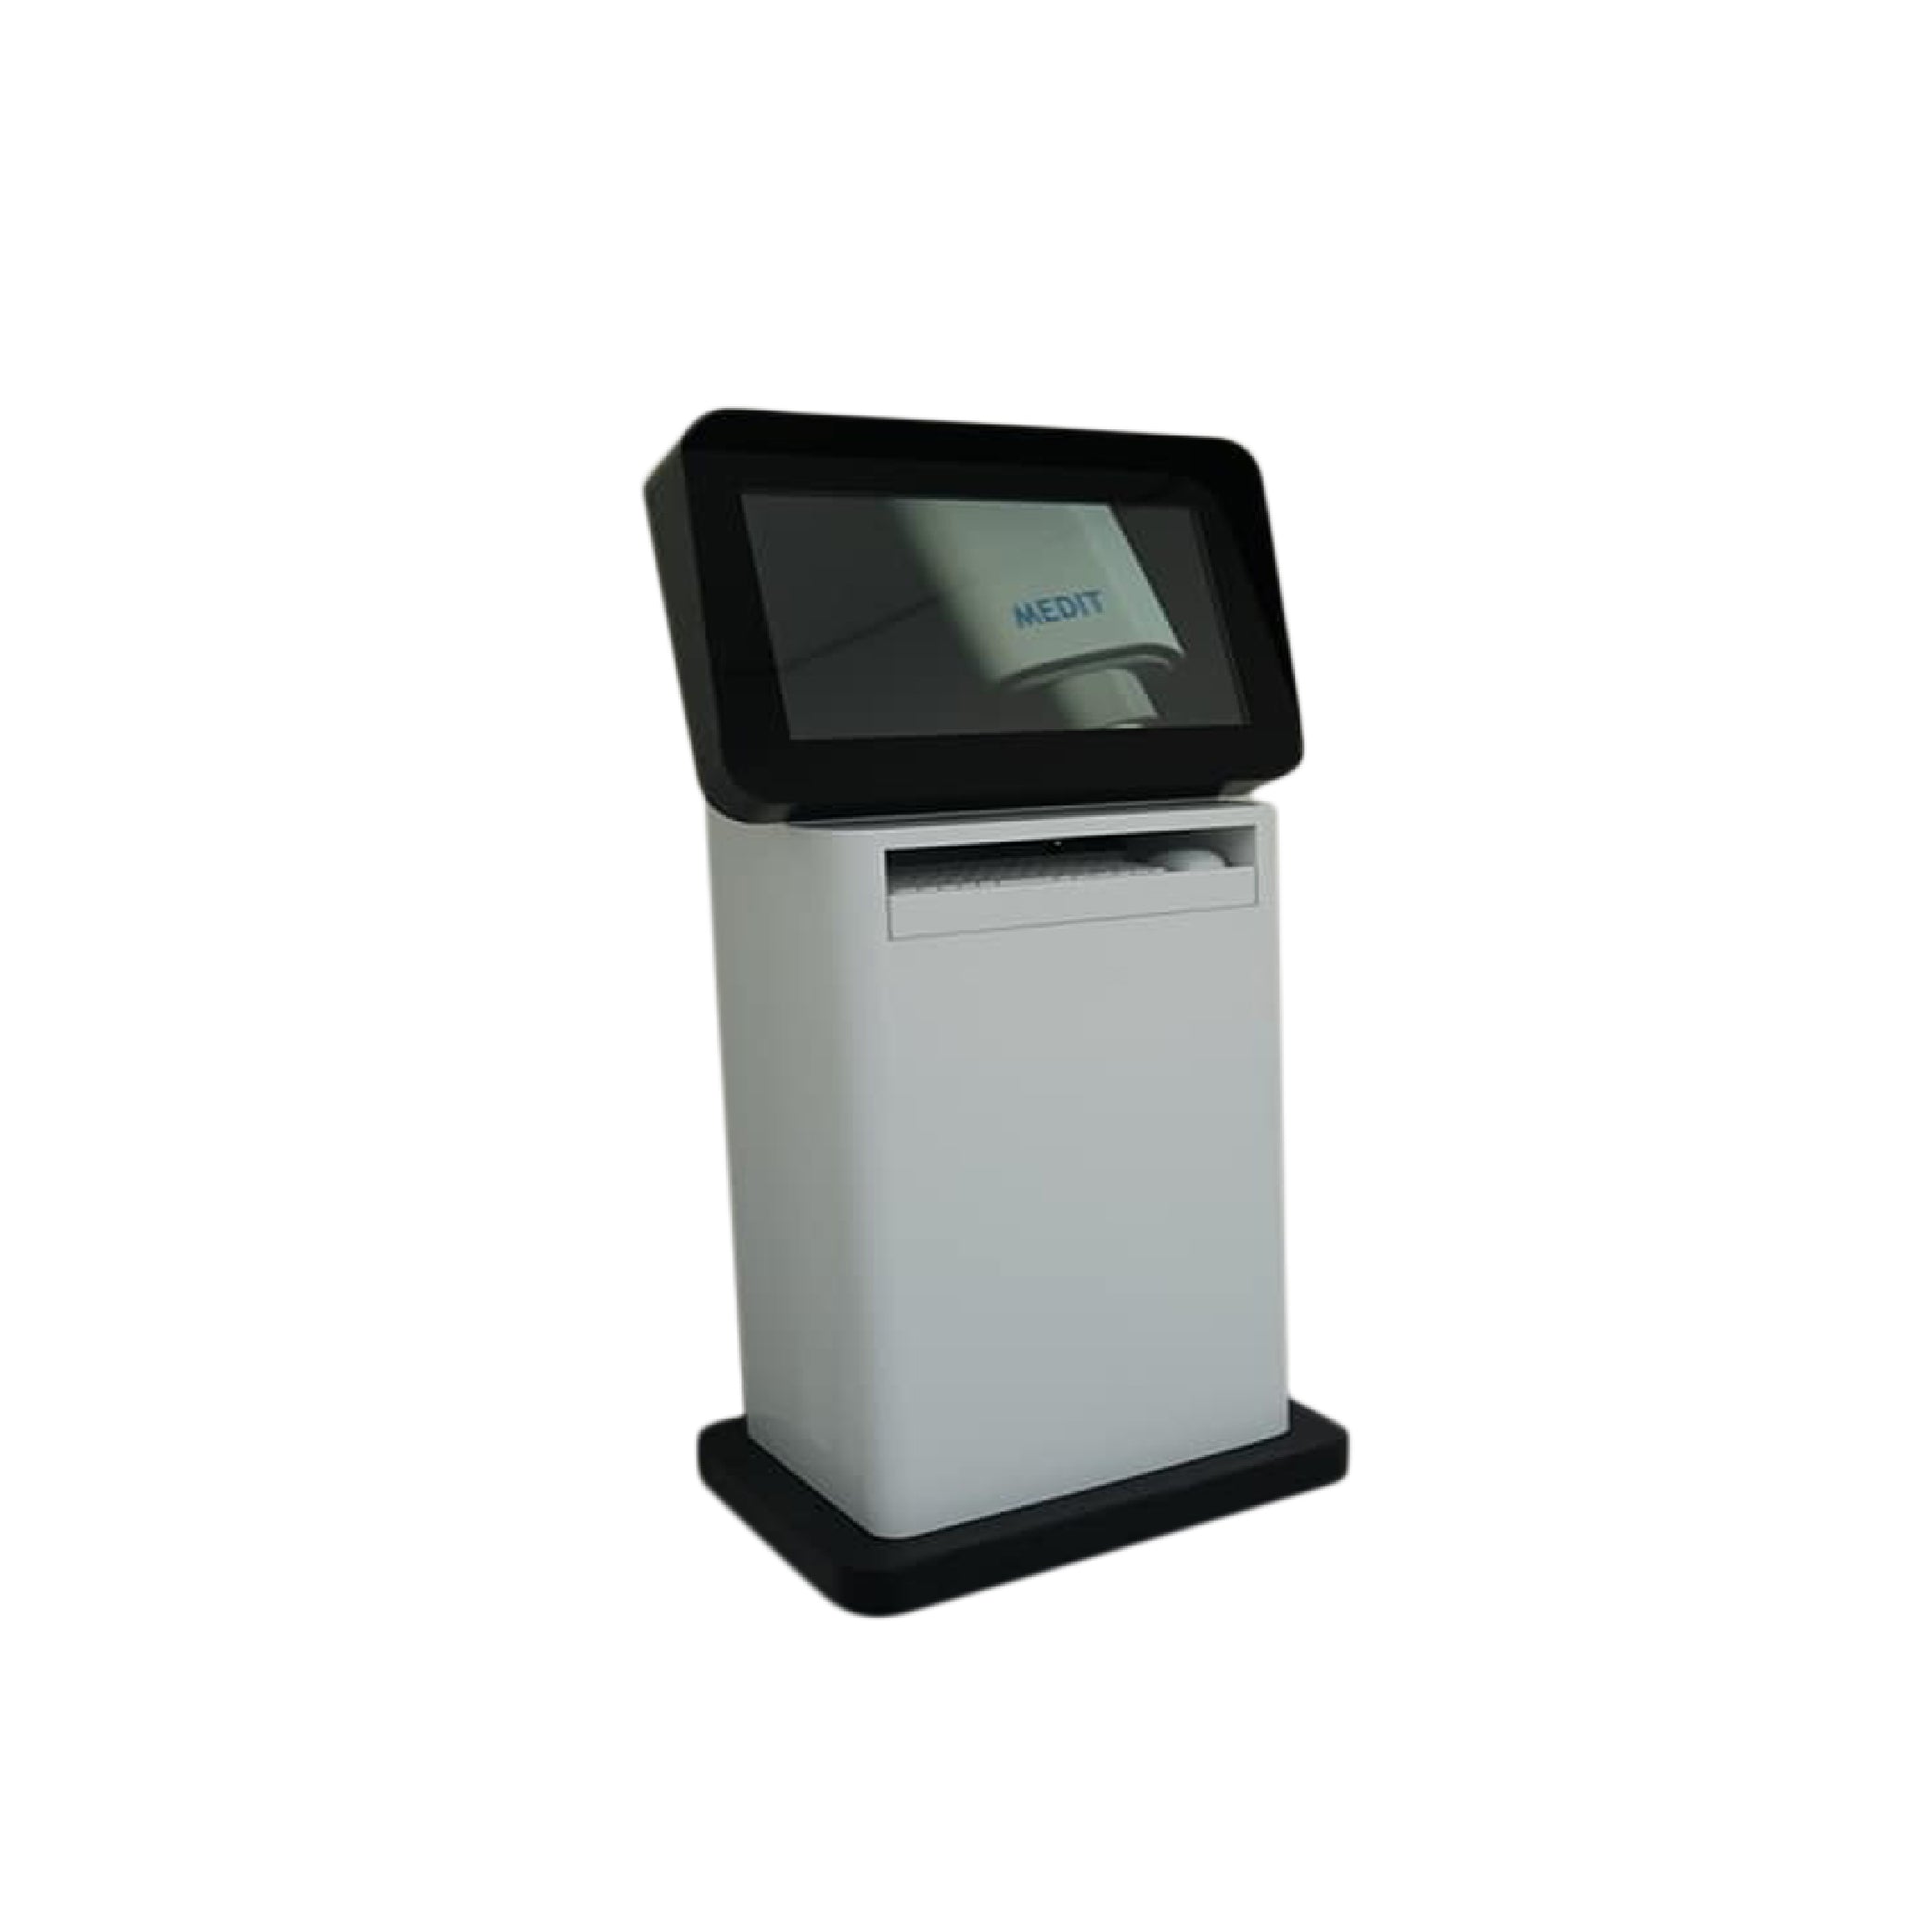 Touch Screen Cart for Medit i500, i700